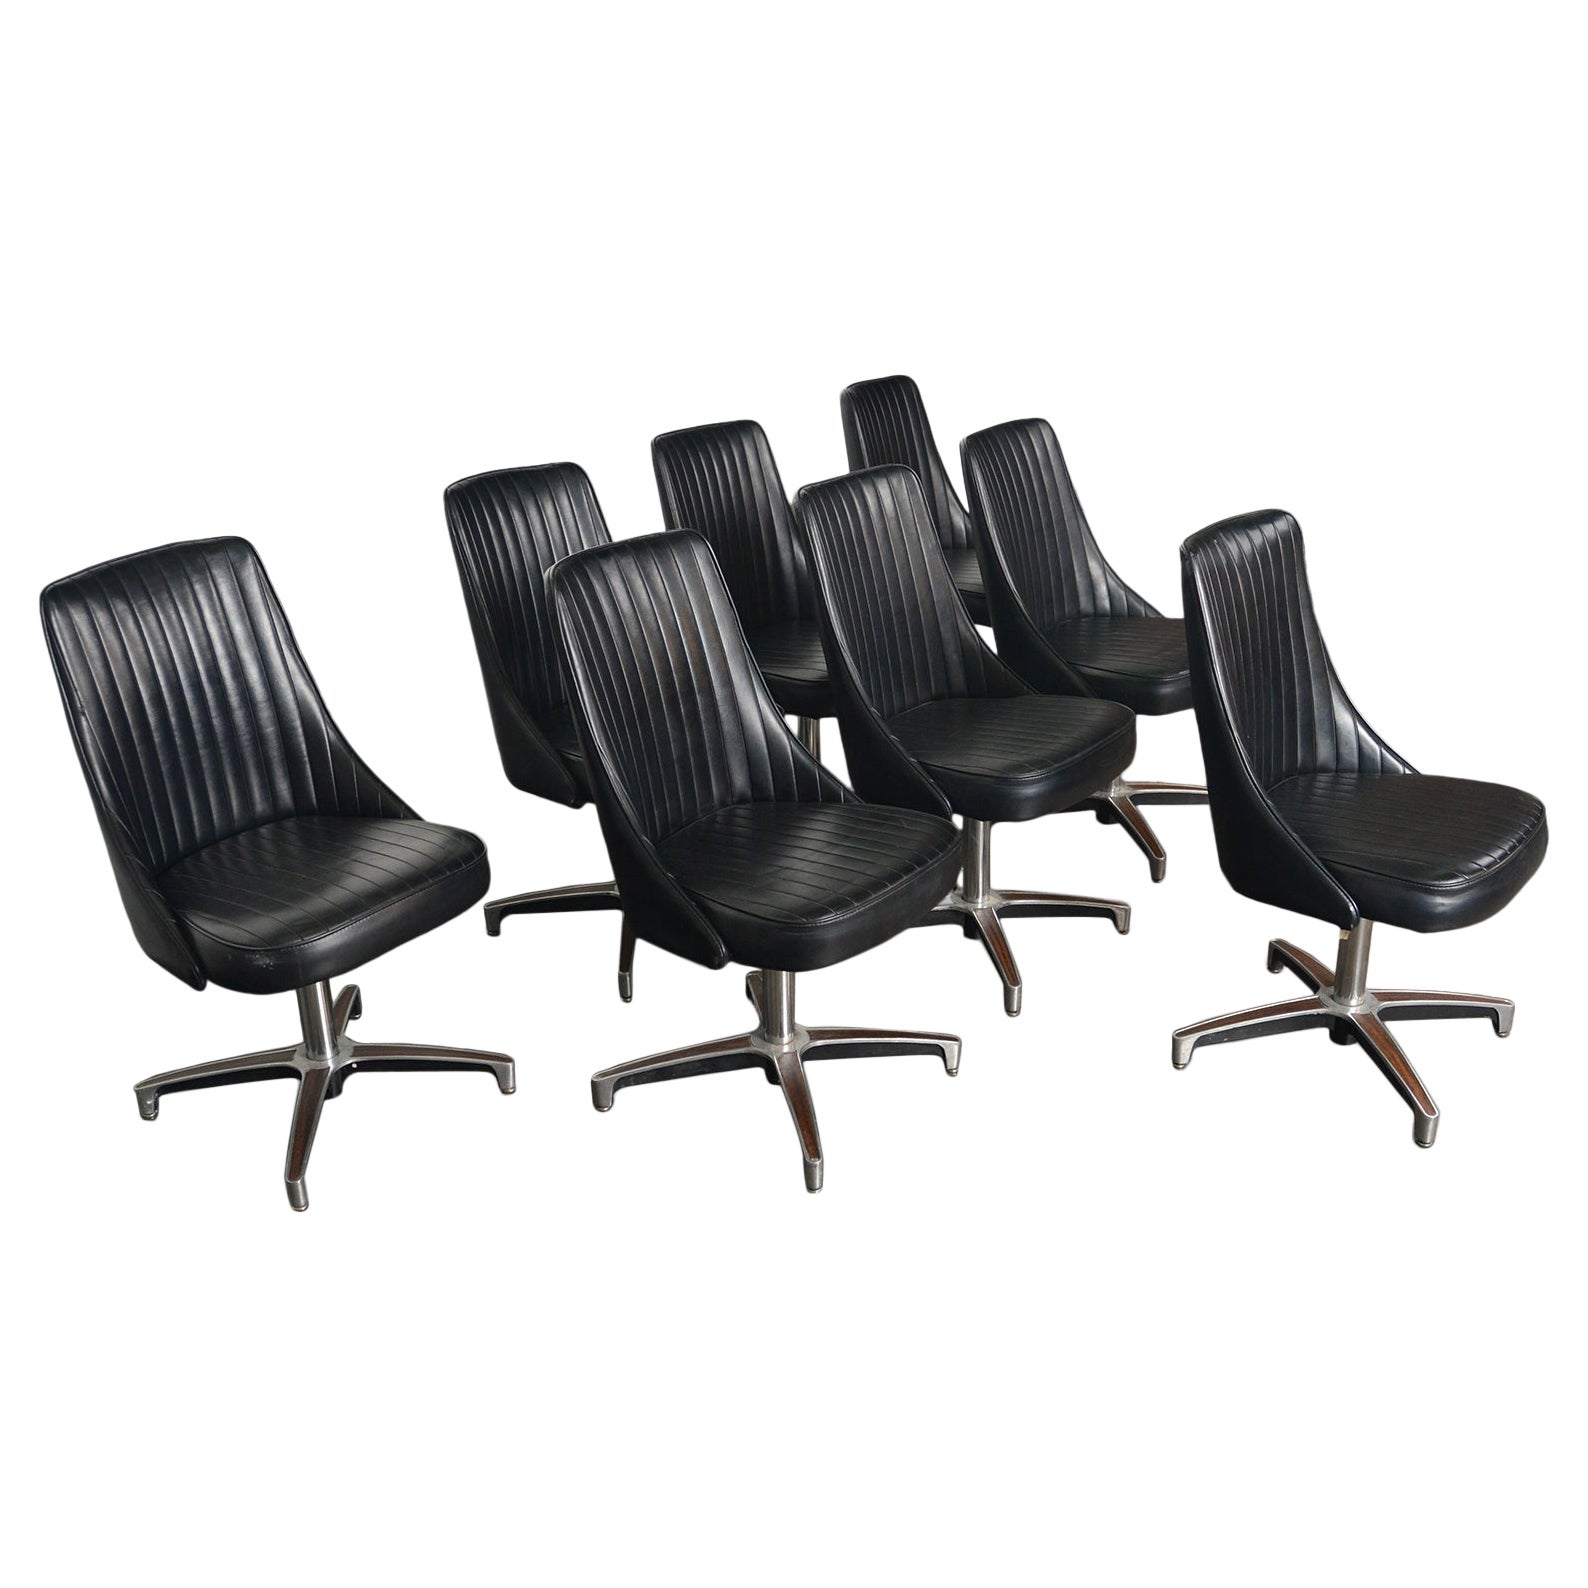 Set of Eight Chromcraft Swivel Dining Chairs In Black Vinyl For Sale